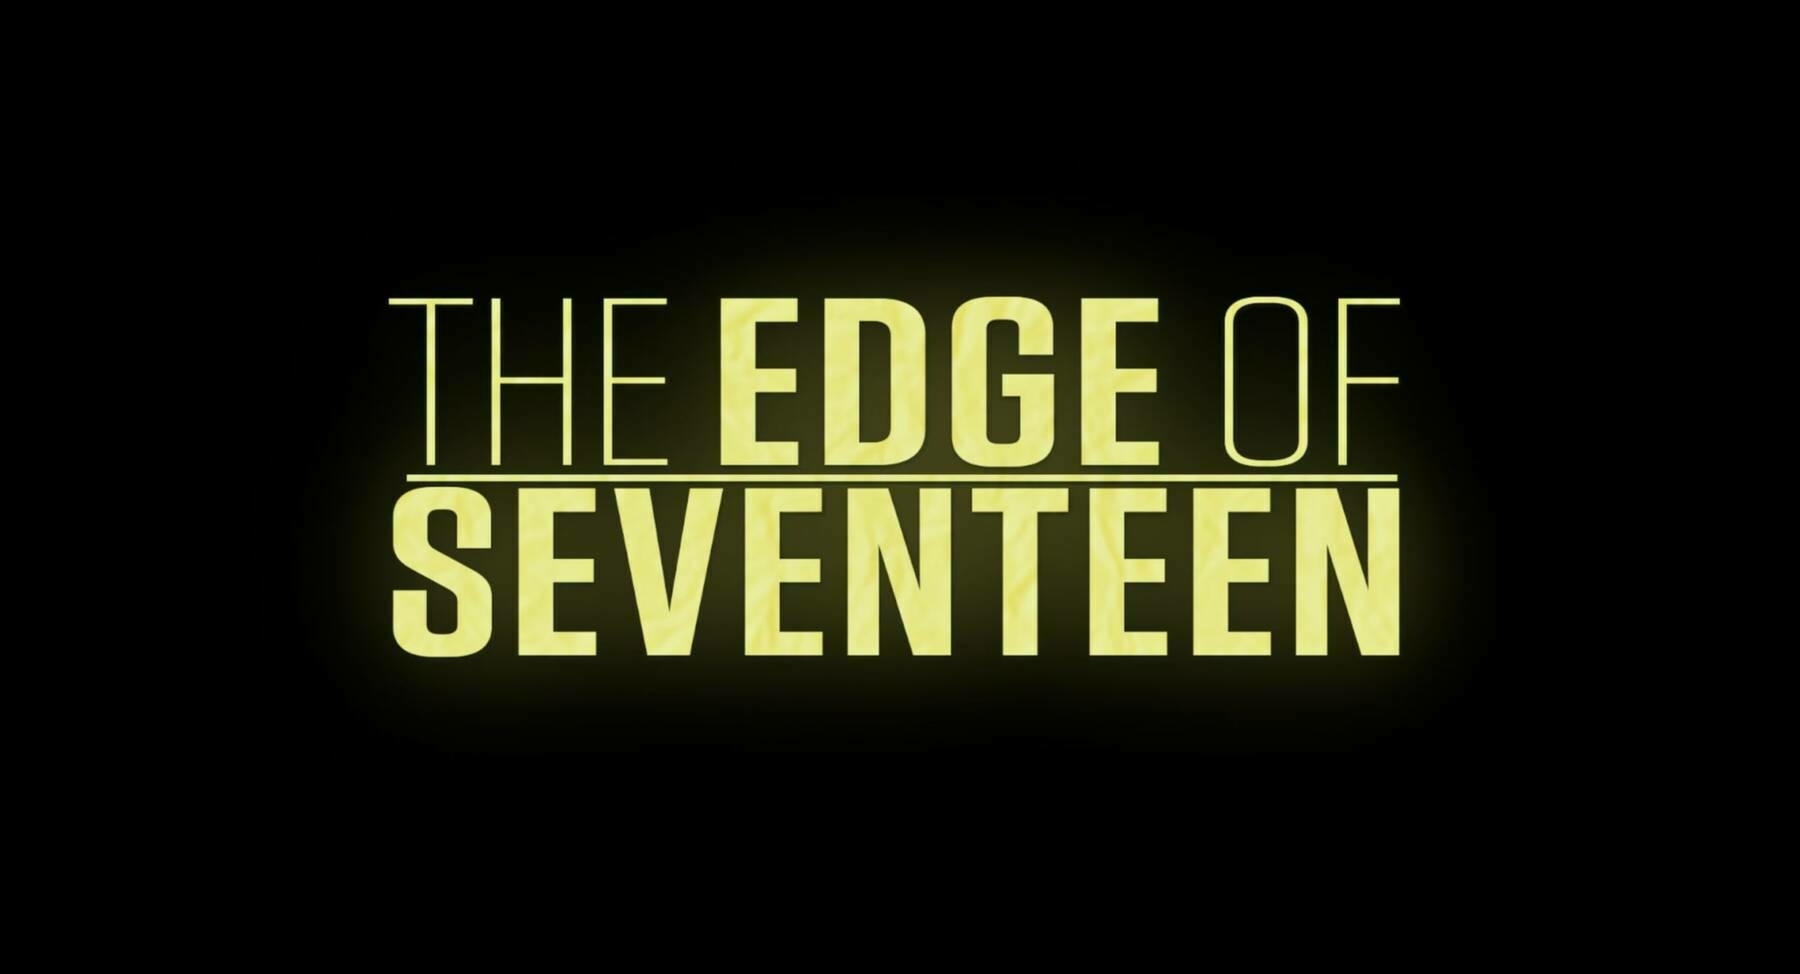 The title card for the film, The Edge of Seventeen.